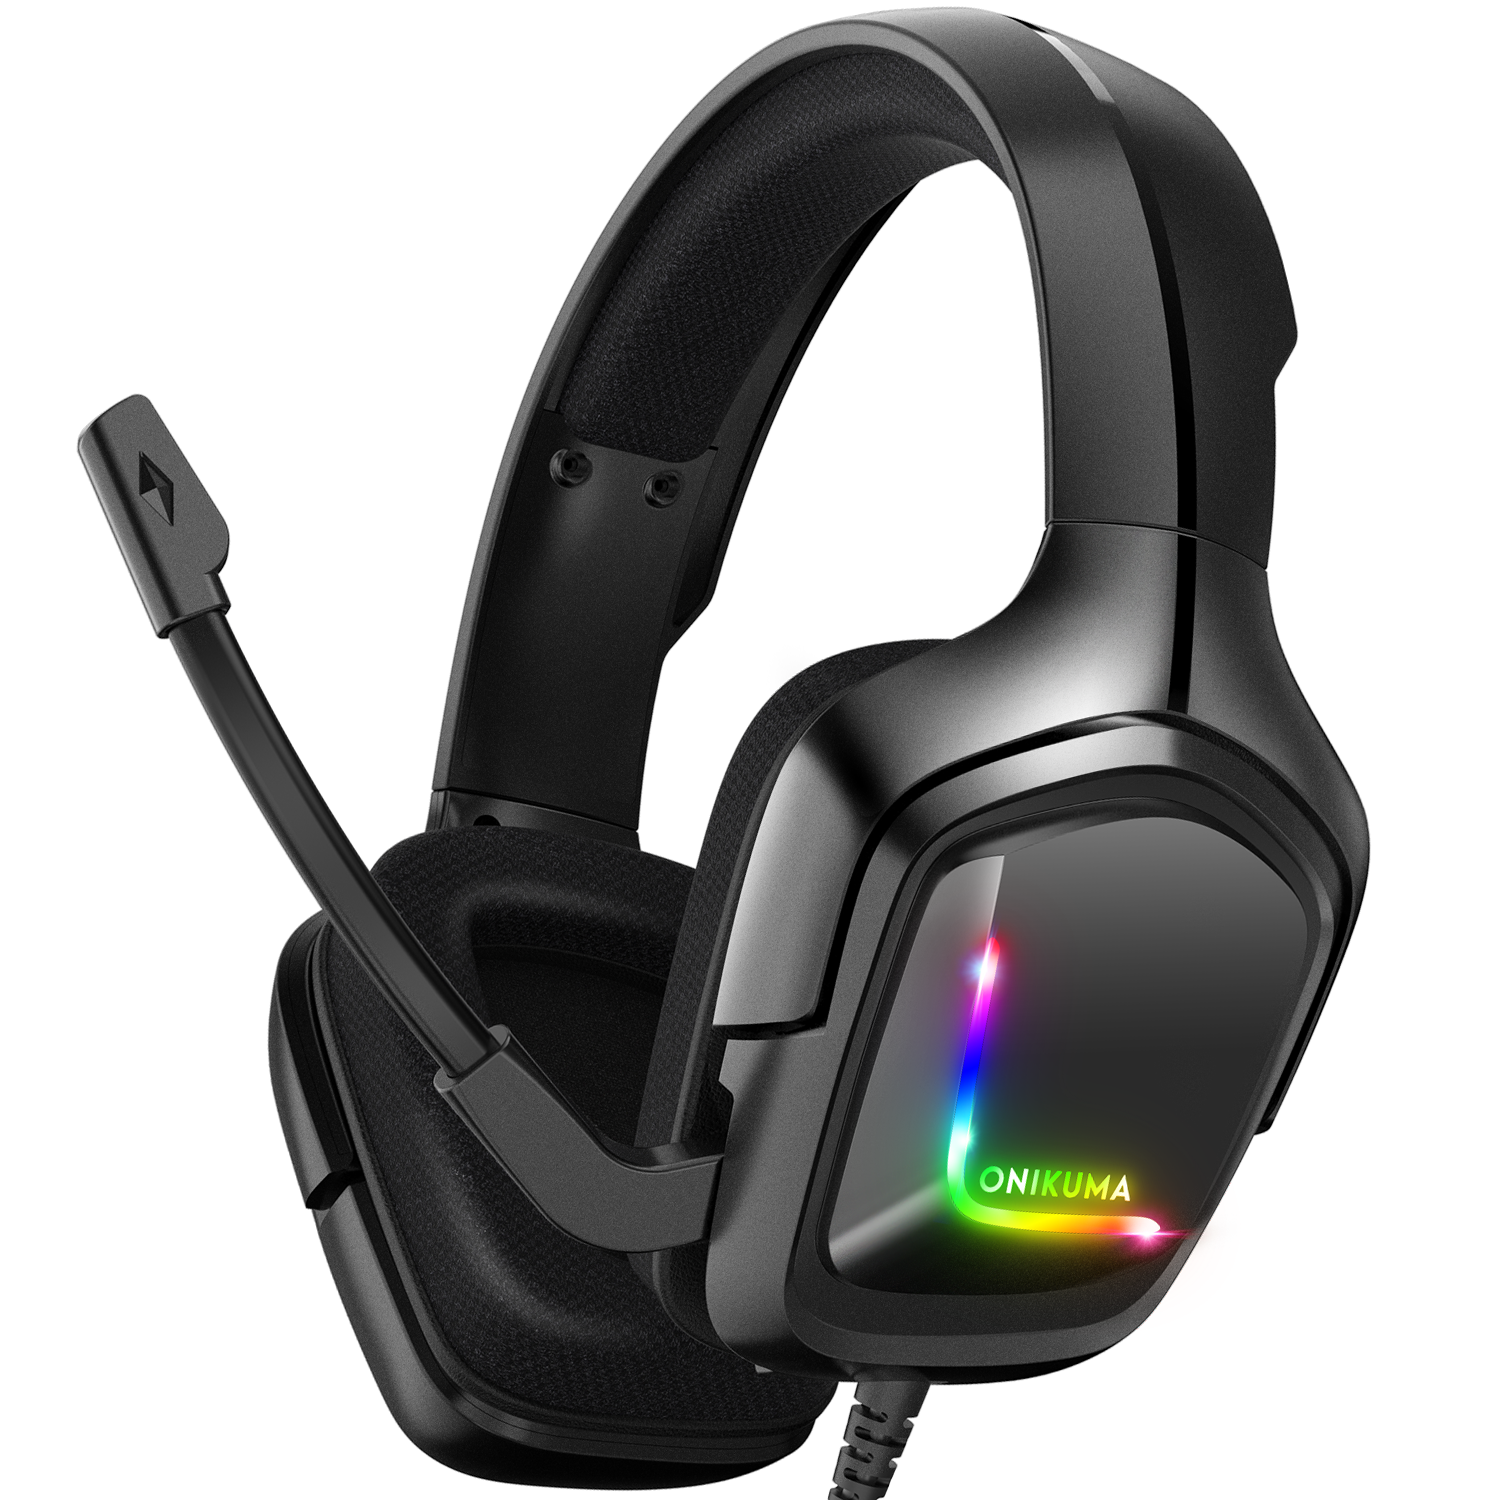 ONIKUMA K20 Wired Gaming Headsets PC/PS4/XBOX